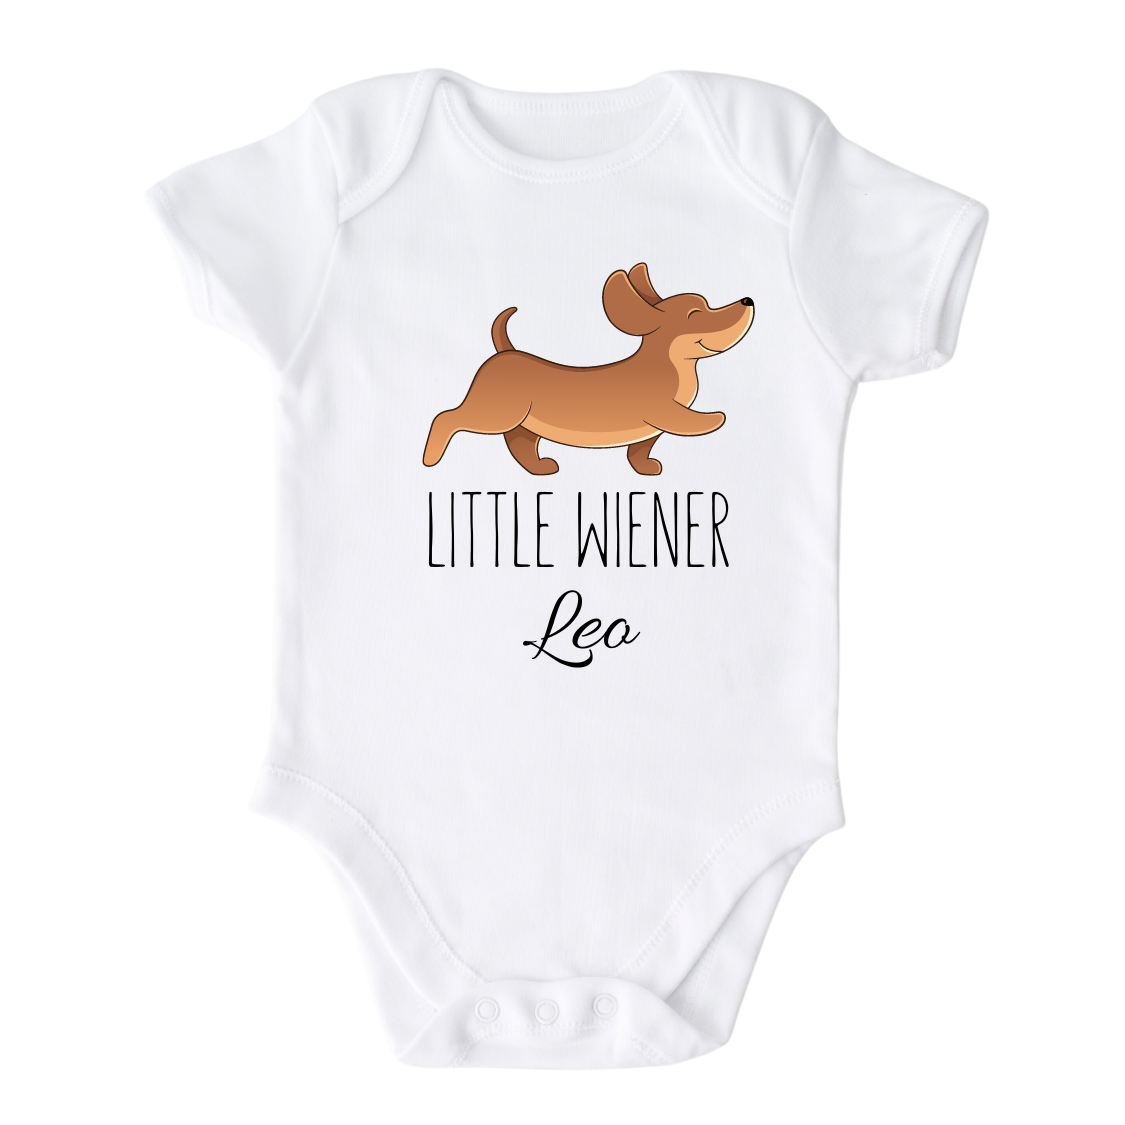 Cute Baby Onsie - Custom Name Baby Gift - Baby Clothes with Name